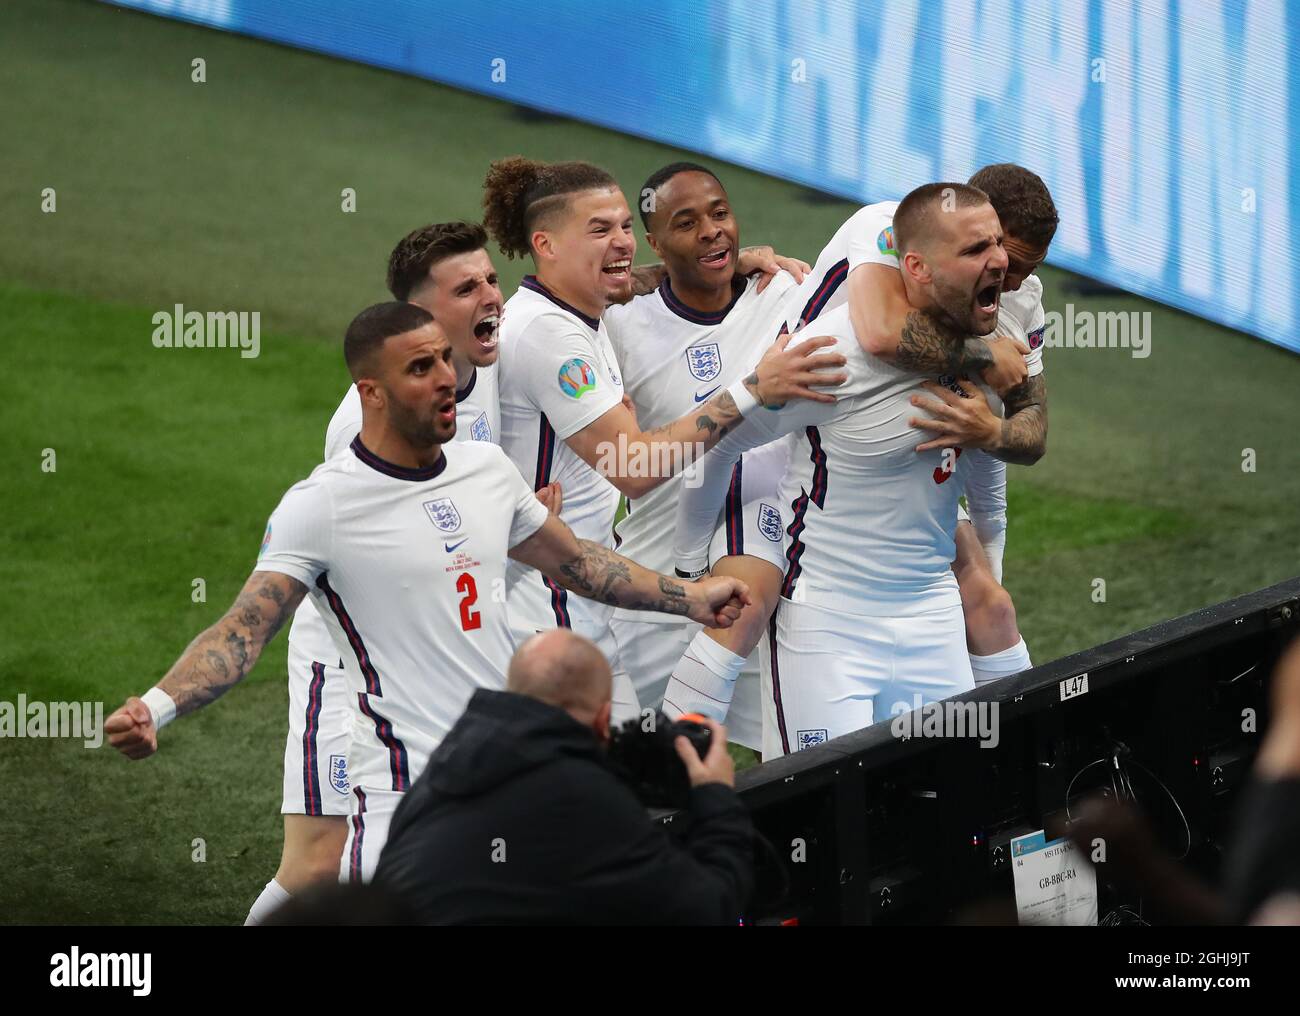 London, England, 11th July 2021. Luke Shaw of England celebrates scoring the first goal during the UEFA Euro 2020 final at Wembley Stadium, London. Picture credit should read: David Klein / Sportimage via PA Images Stock Photo